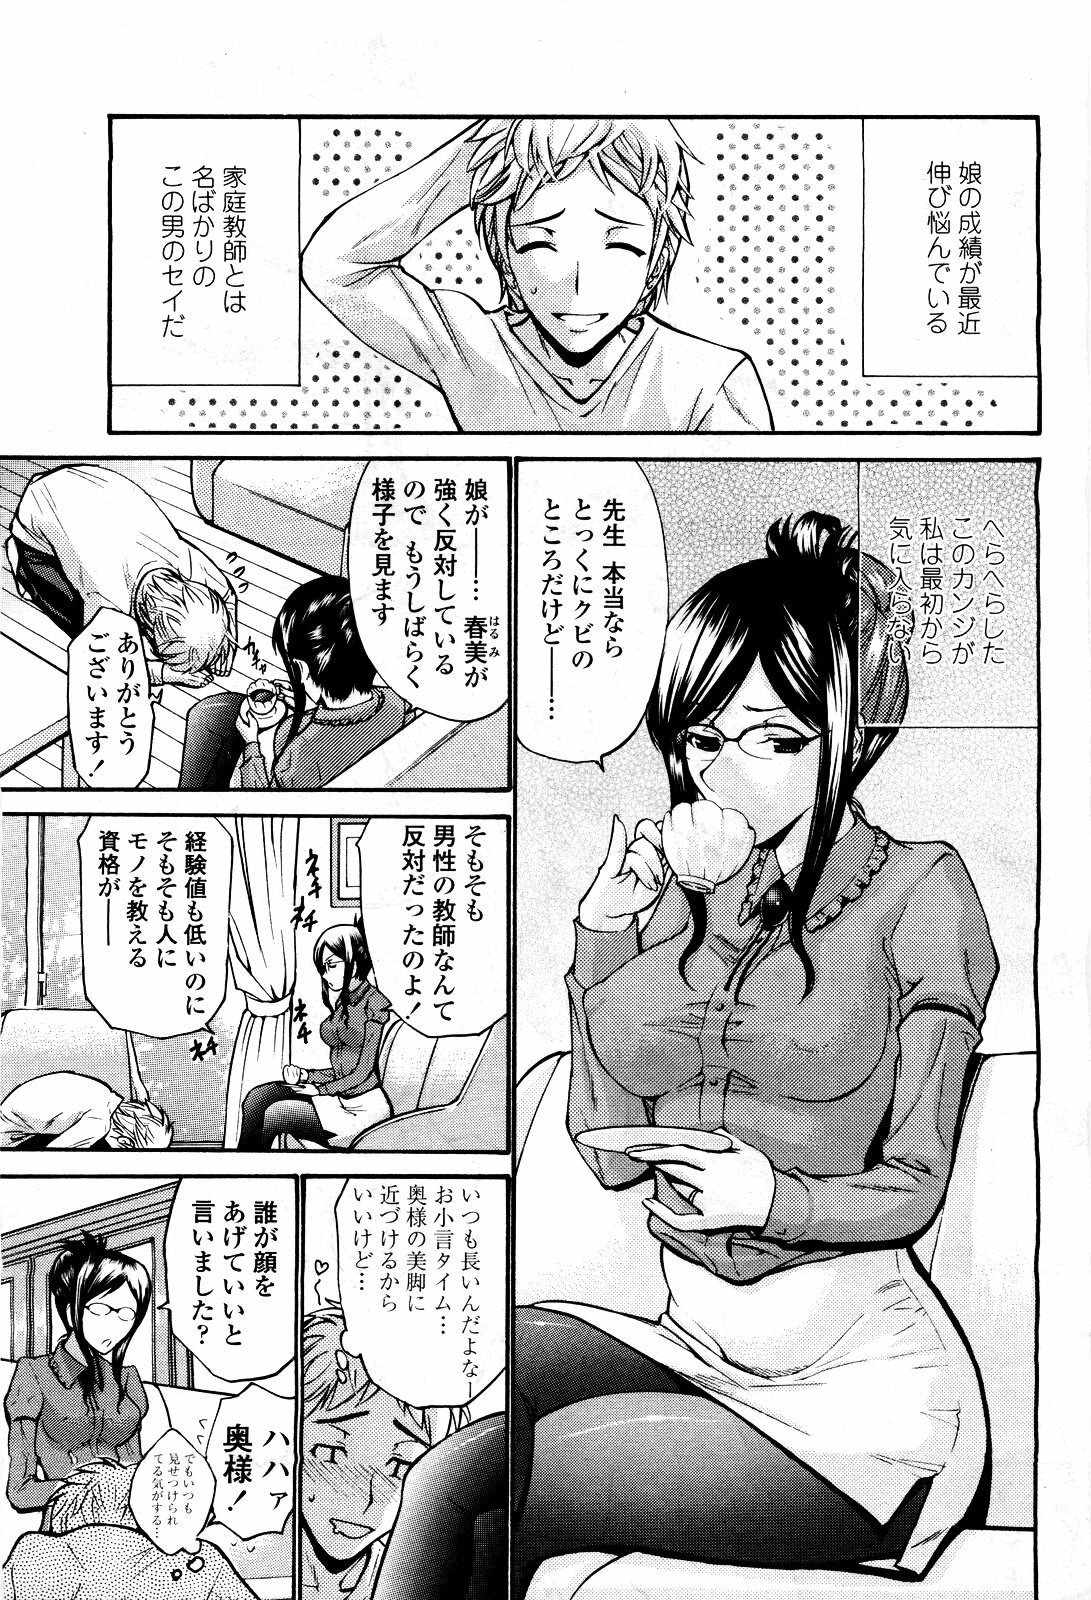 COMIC Momohime 2010-03 page 45 full